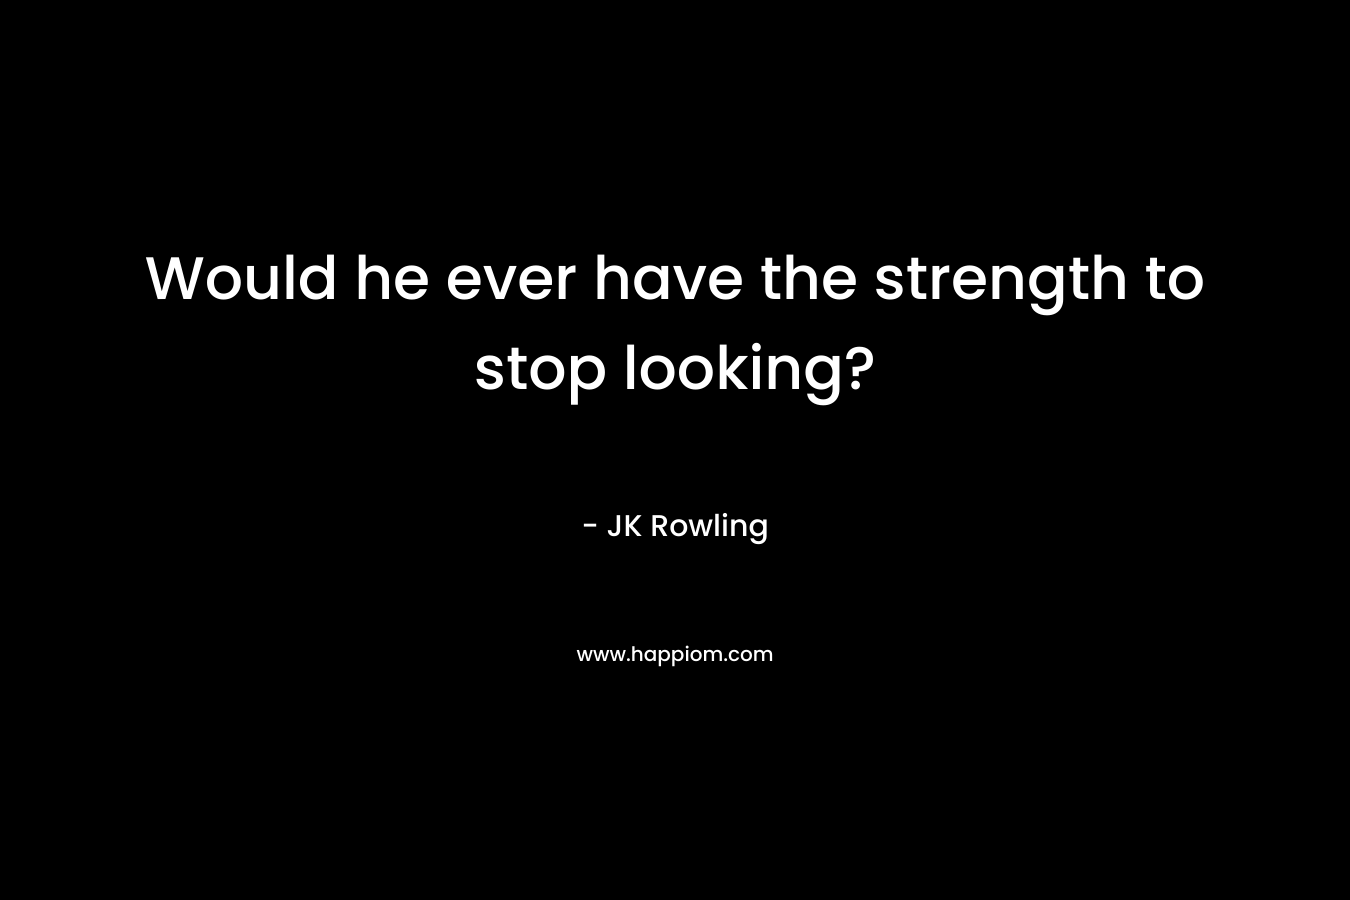 Would he ever have the strength to stop looking?